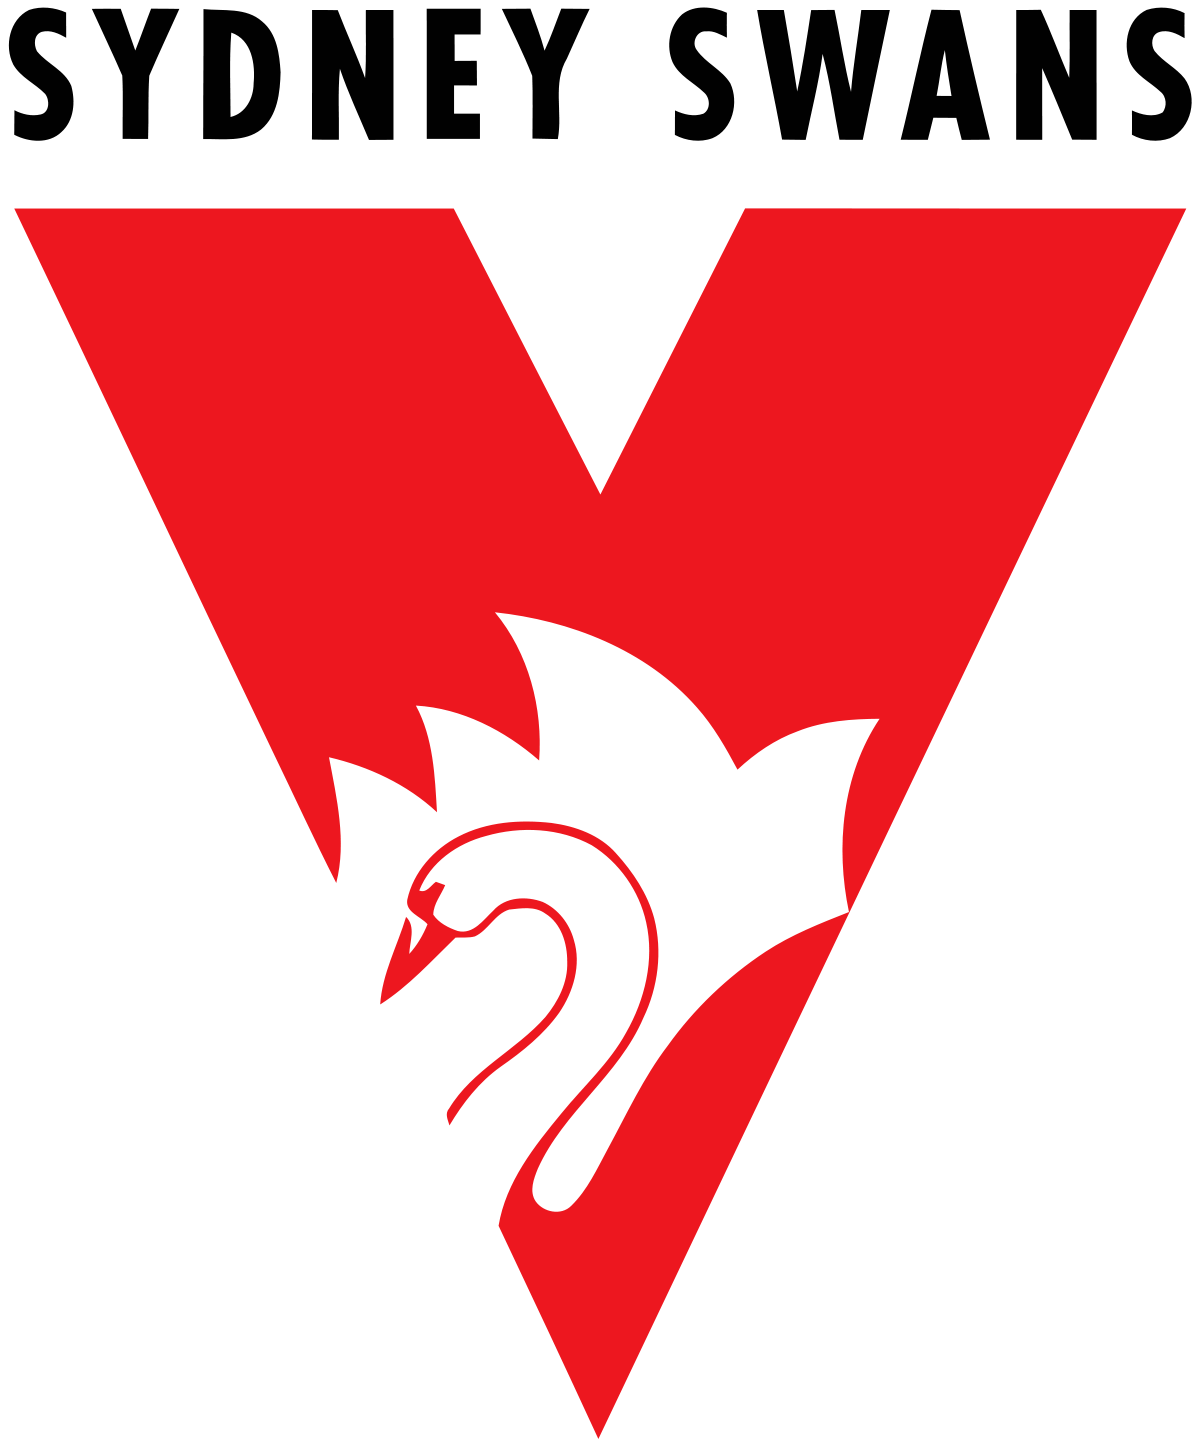 Red and White Swan Logo - Sydney Swans